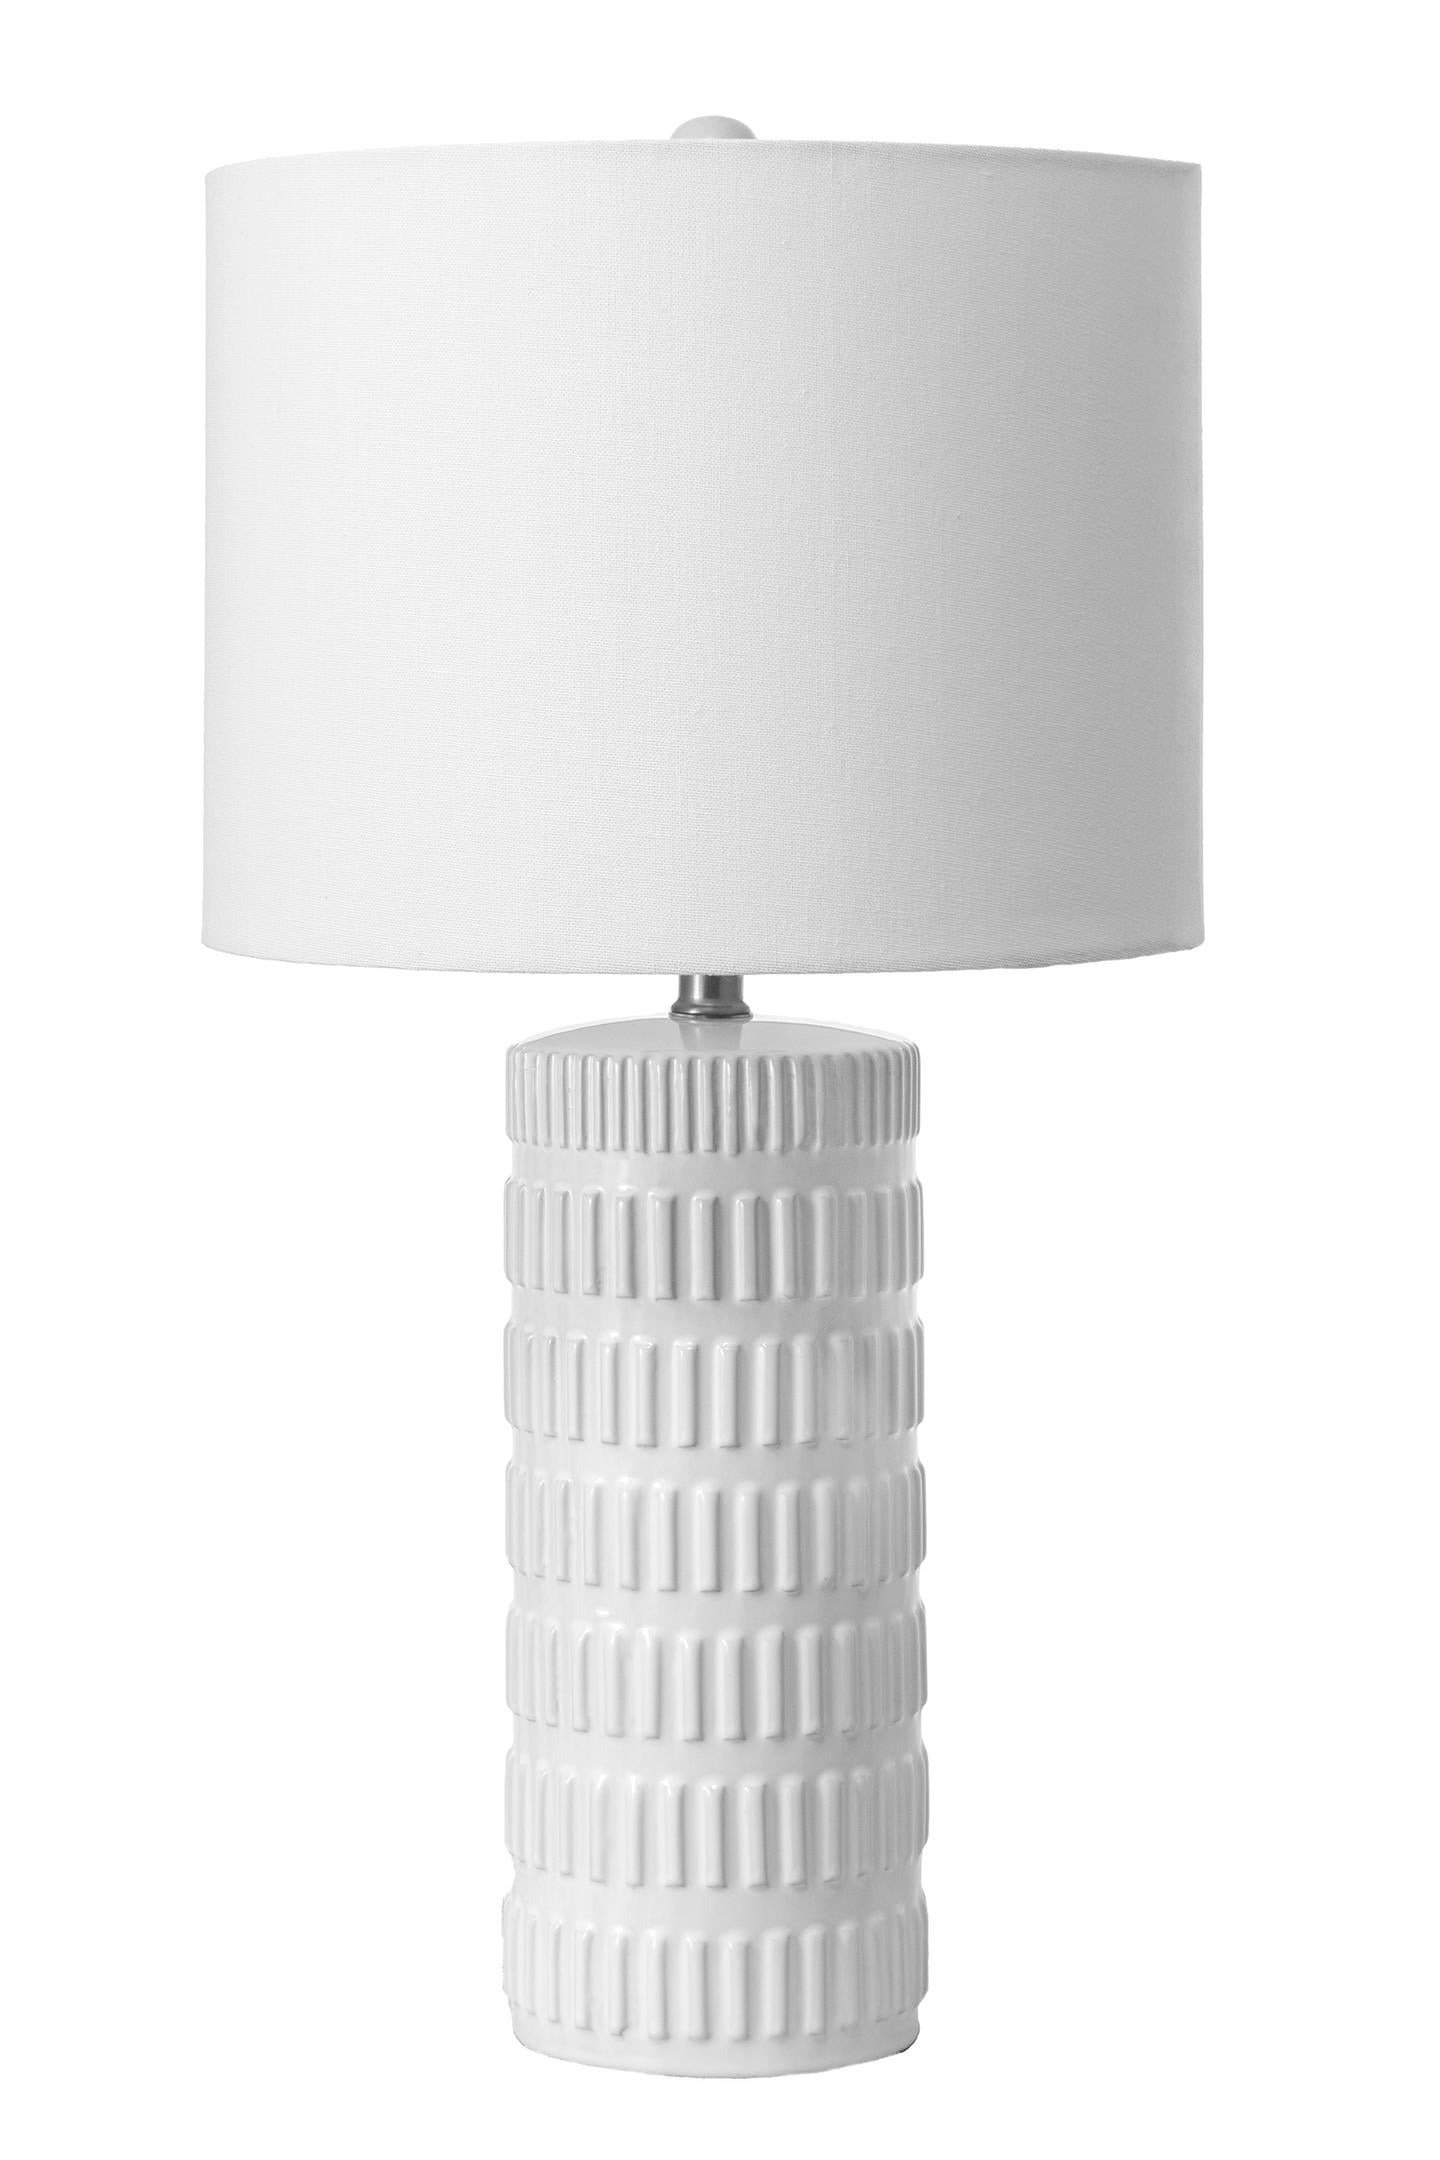 Fairfax Contemporary Textured Round White Ceramic Table Lamp with White Shade 